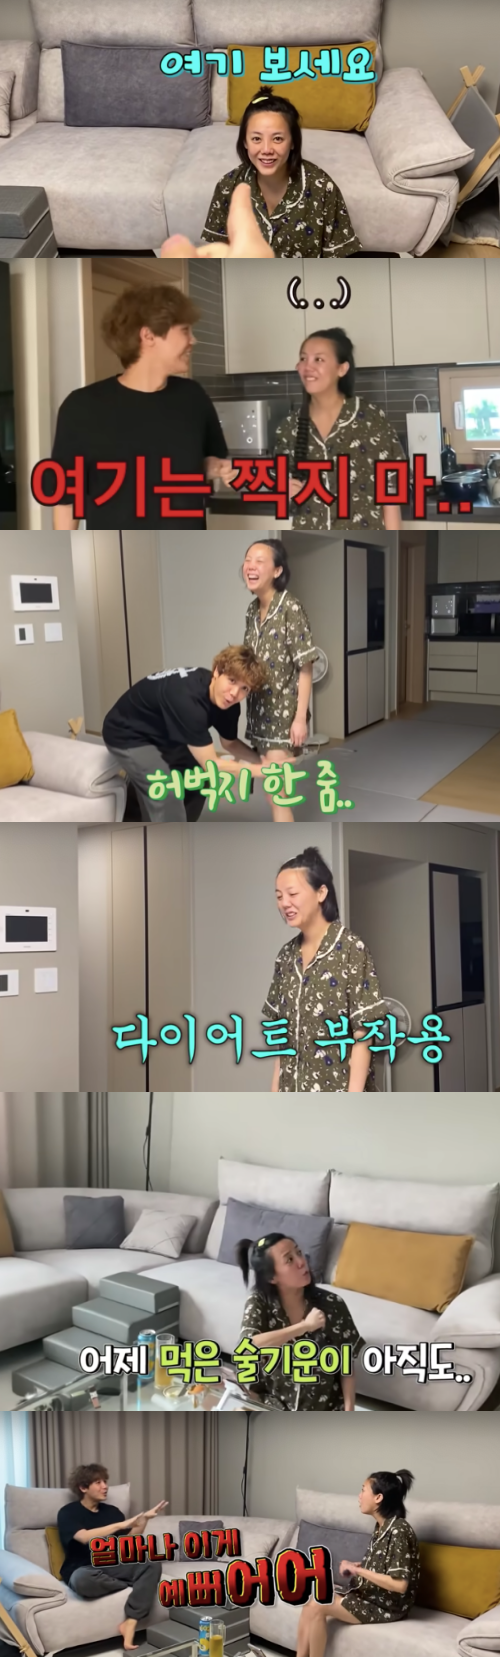 Another pleasant routine was uploaded on the channel Bangane, run by Go Eun-ah (real name Bang Hyo-jin), Mir (real name Bang Cheol-yong) Brother and Sister.On the 21st, the video was posted on the TV with a pleasant title, Do not use weapons ... to your mother.In the video, Mir looked into the eyes of sister Go Eun-ah and said, The focus is strange. He suspected Go Eun-ah, who declared the abstinence.Go Eun-ah said, Beer is the only drink, but he did not believe it, and eventually Go Eun-ah shot his brother Mir and made him laugh.The first Sister Bang Hyo-sun, who shoots the video, said, I do not like to be caught by us these days. Go Eun-ah emphasized that I am not cute in my drink and that it is set as a Beer.Mir said, No one says that they drank, and the focus of the eyes is released a lot. Why do you lie about habituality, do not go to a drink like this?At this time, Bang Hyo-sun closed up Go Eun-ah and mentioned Go Eun-ah, who lost weight in Diet, and Mir immediately caught Go Eun-ahs High and said, A handful is caught, Diet side effect and Sister Bang Hyo-sun laughed.My brother Mir also said, The foot is really drooping.Above all, Go Eun-ah, who continued to drink Beer, said, I know how much I drank even if I looked at my eyes. Go Eun-ah admitted, Yes I am drinking cute.Meanwhile, Go Eun-ah recently confessed to losing 12kg of Diet, revealing his long legs that reveal the bones, making him expect how much he has lost weight in the meantime.Also, Go Eun-ah, known as the affluent, recently attracted attention by drinking water and milk instead of drinking in front of a convenience store with Sister Hyo-sun.Banggane capture